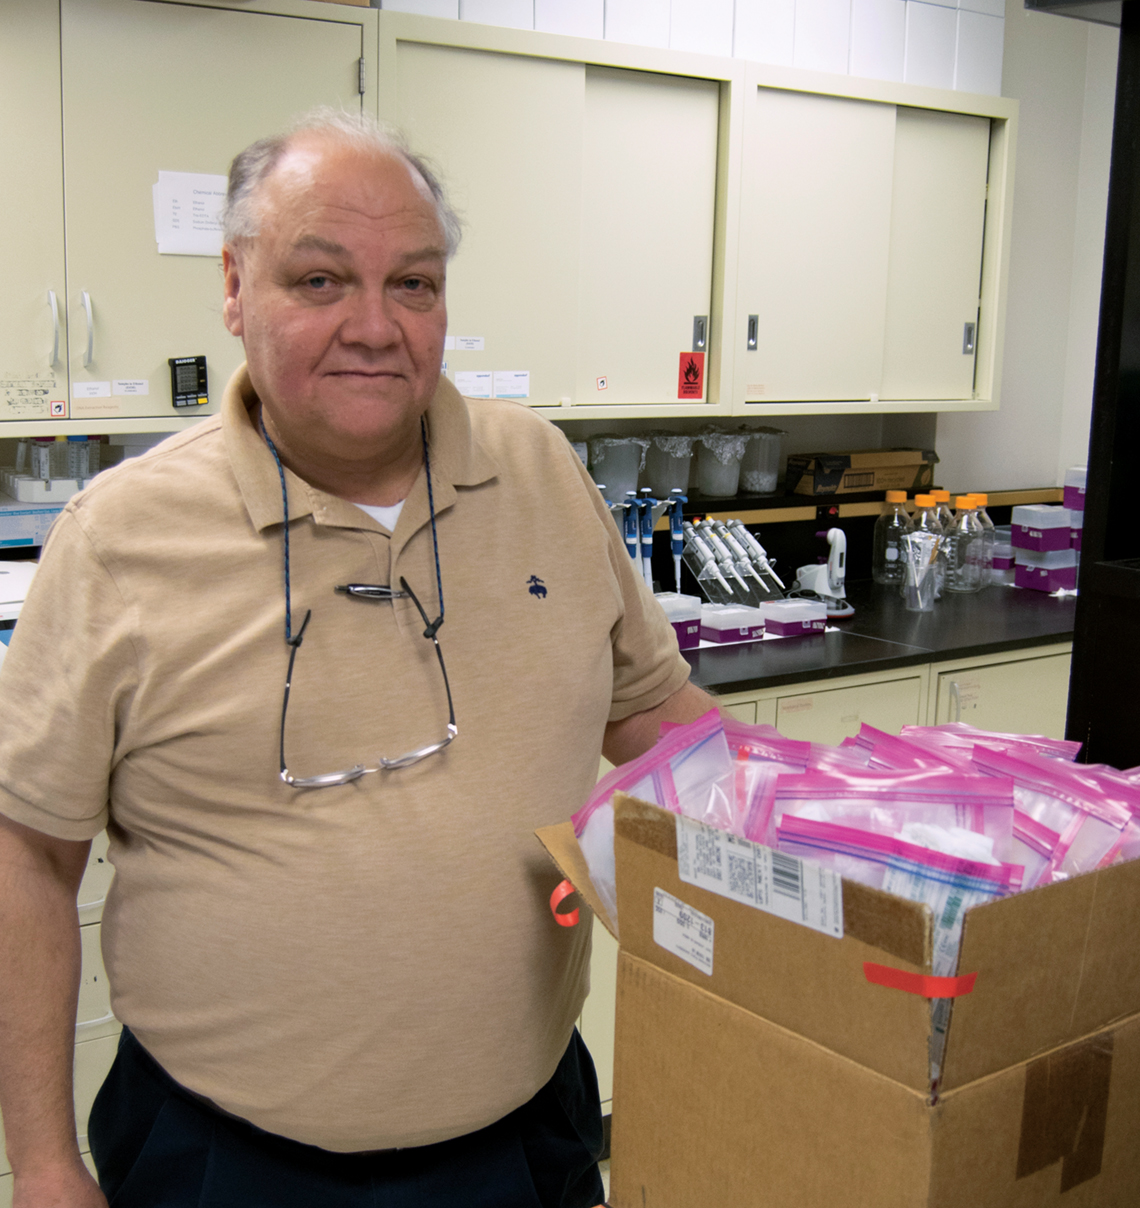 Carl Schmidt, Wayne County medical examiner, picks up microbiome kits from Benbow's lab.